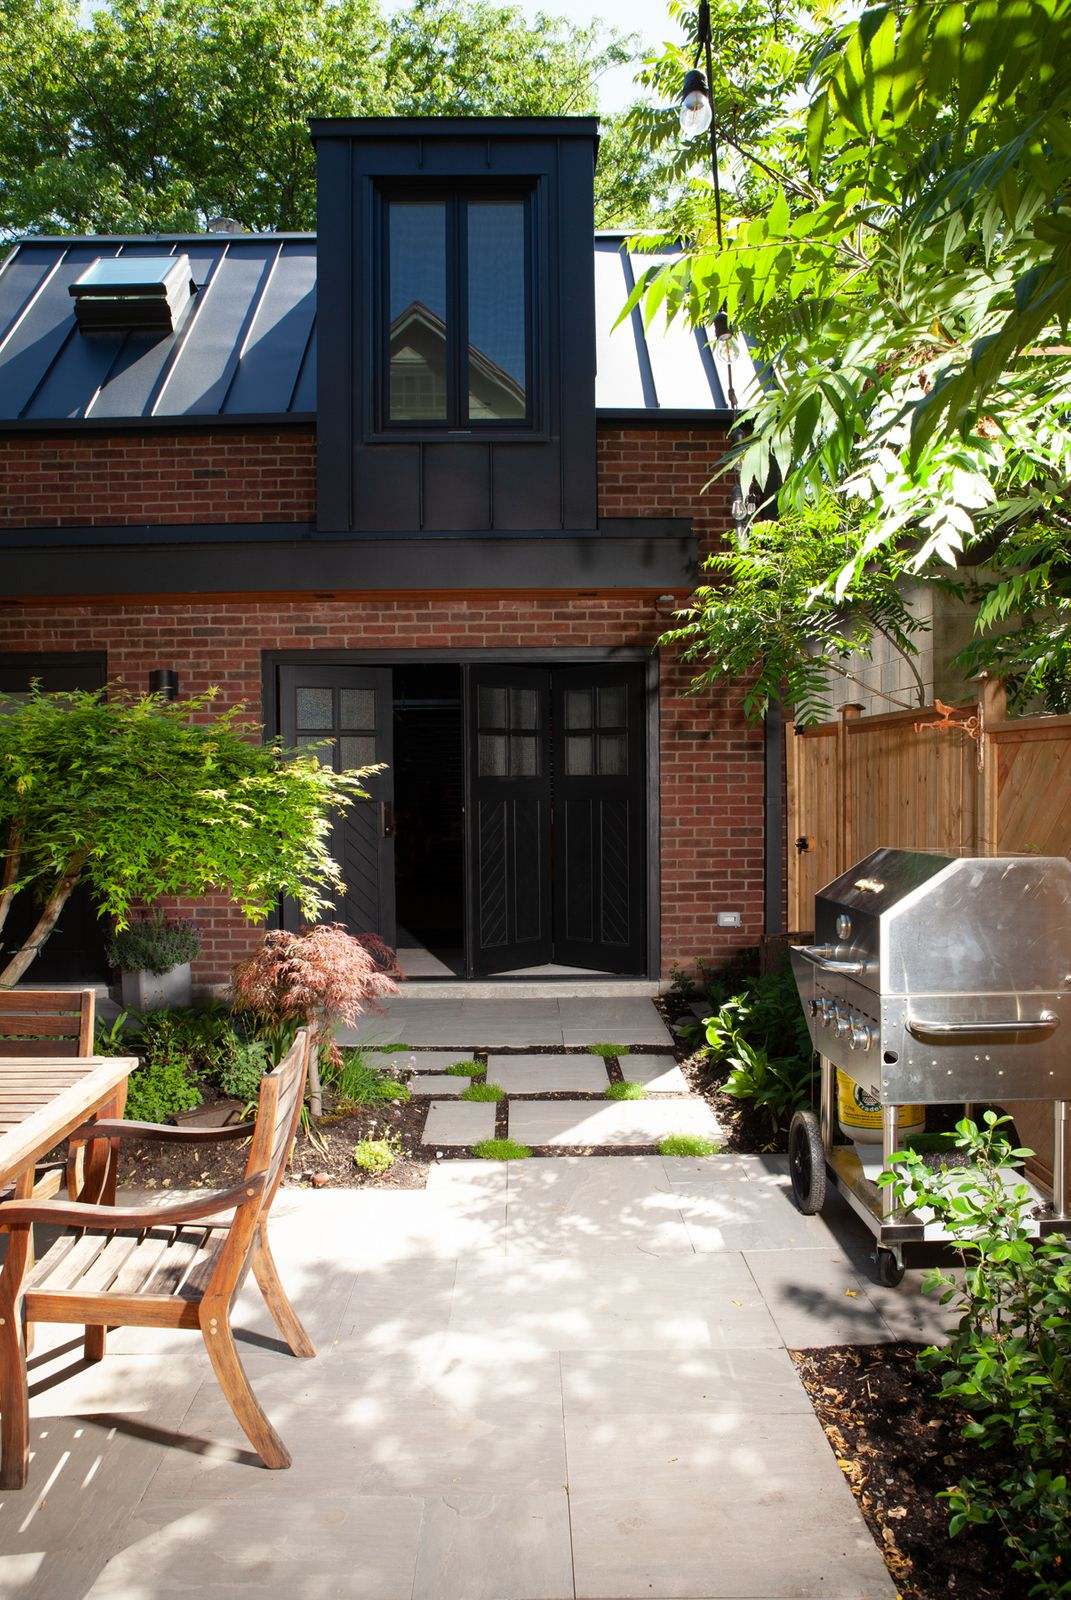 Traditional brick laneway house in Danforth on sunny day with bi-fold black doors